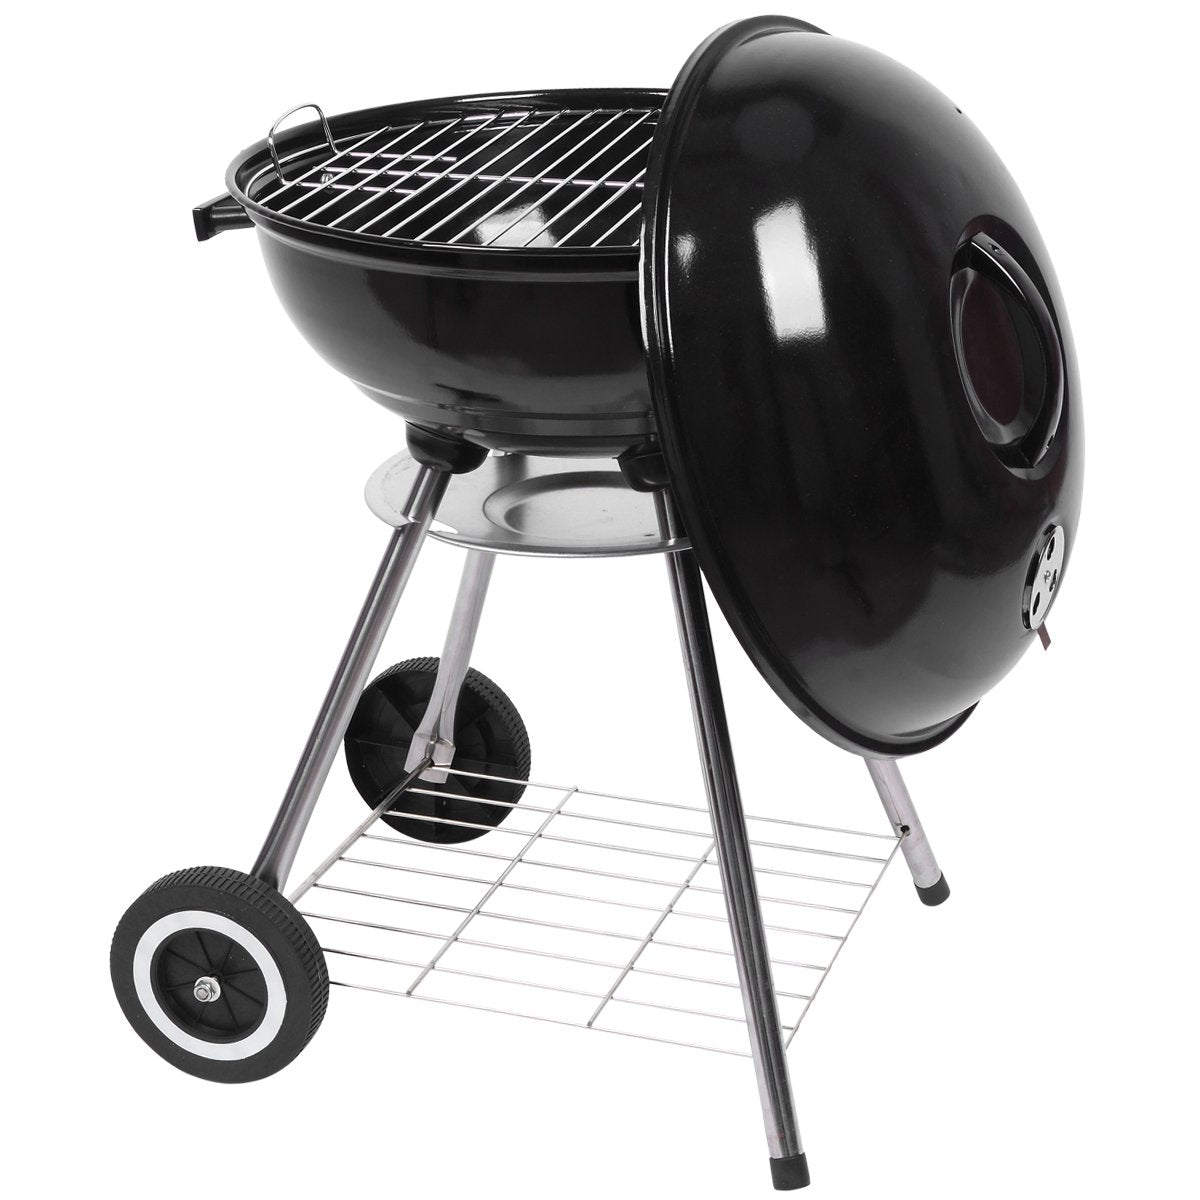 18 Inch Charcoal Grill for Outdoor Camping, High Round Charcoal Barbecue Grill with Thickened Grilling Bowl for Picnic Small BBQ Kettle Patio with Durable Wheels, B029